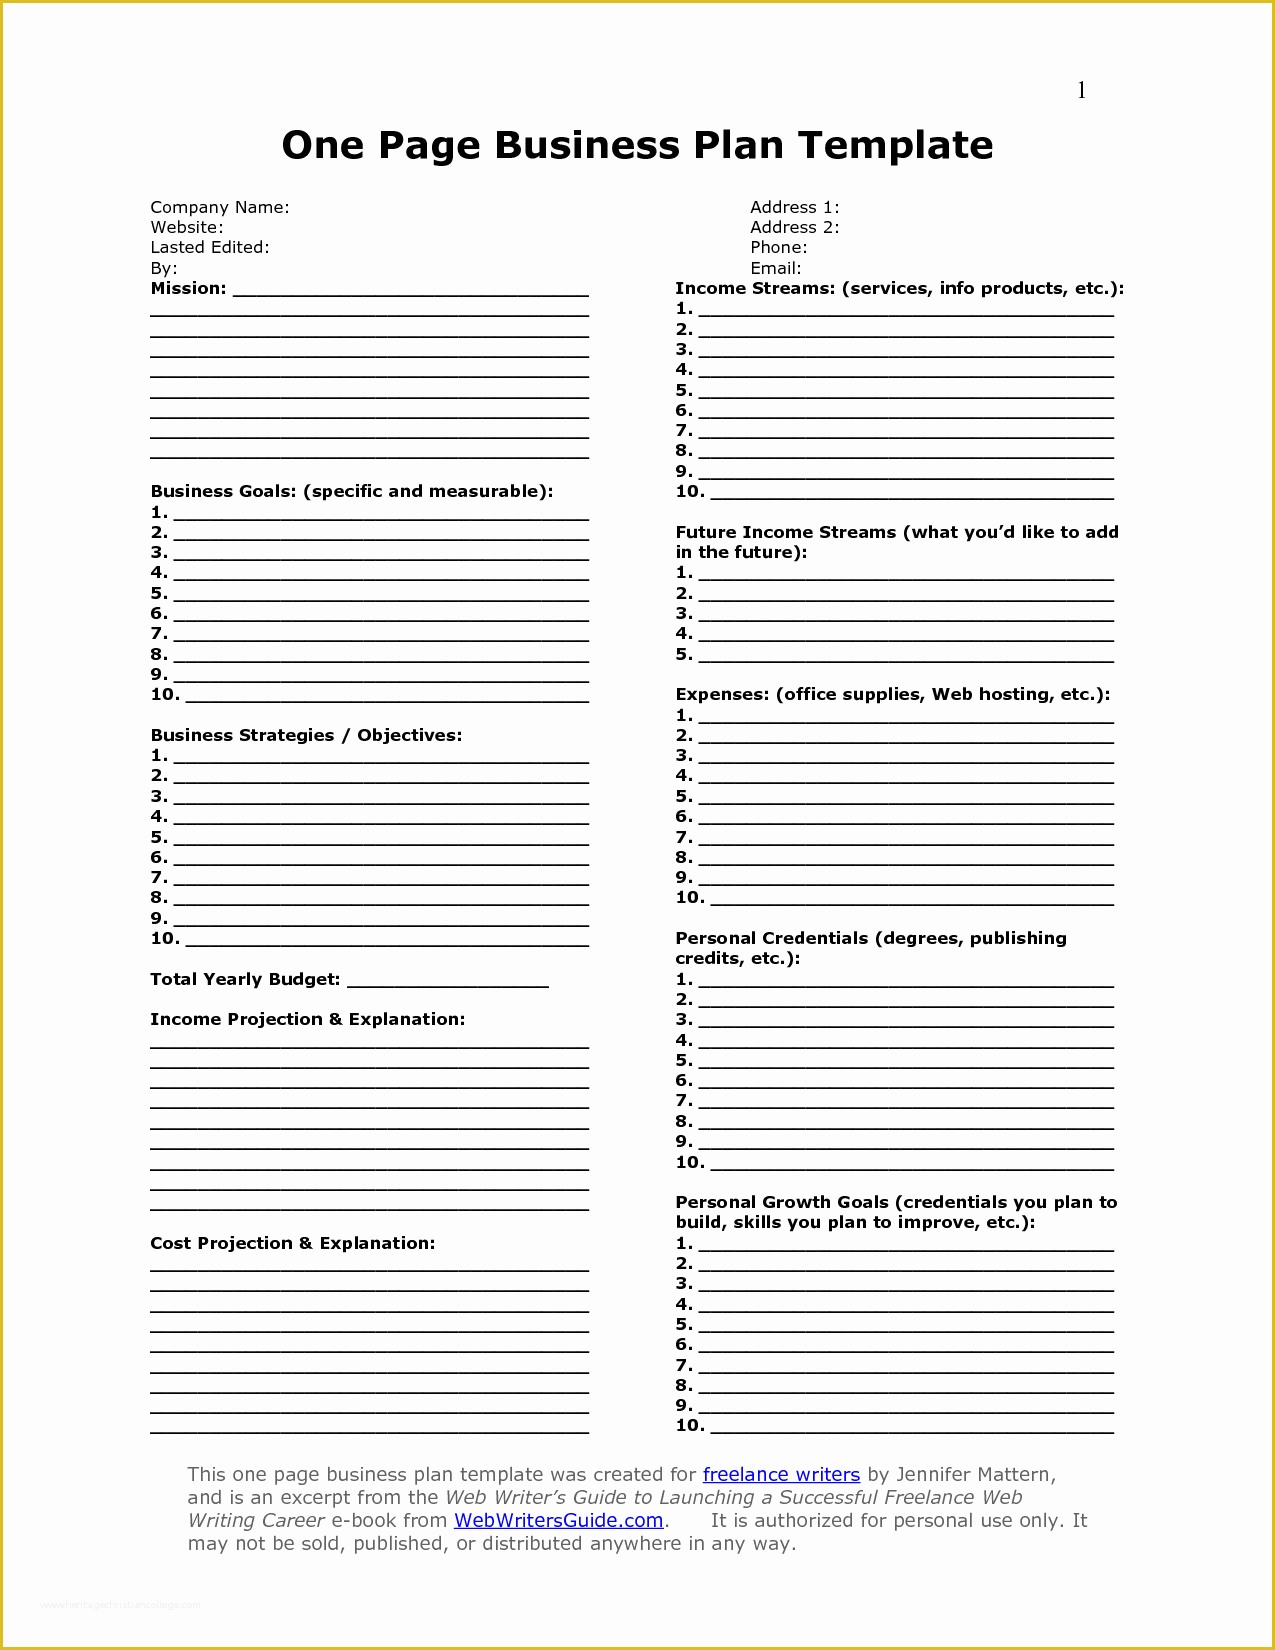 Free Dispensary Business Plan Template Of E Page Business Plan Template